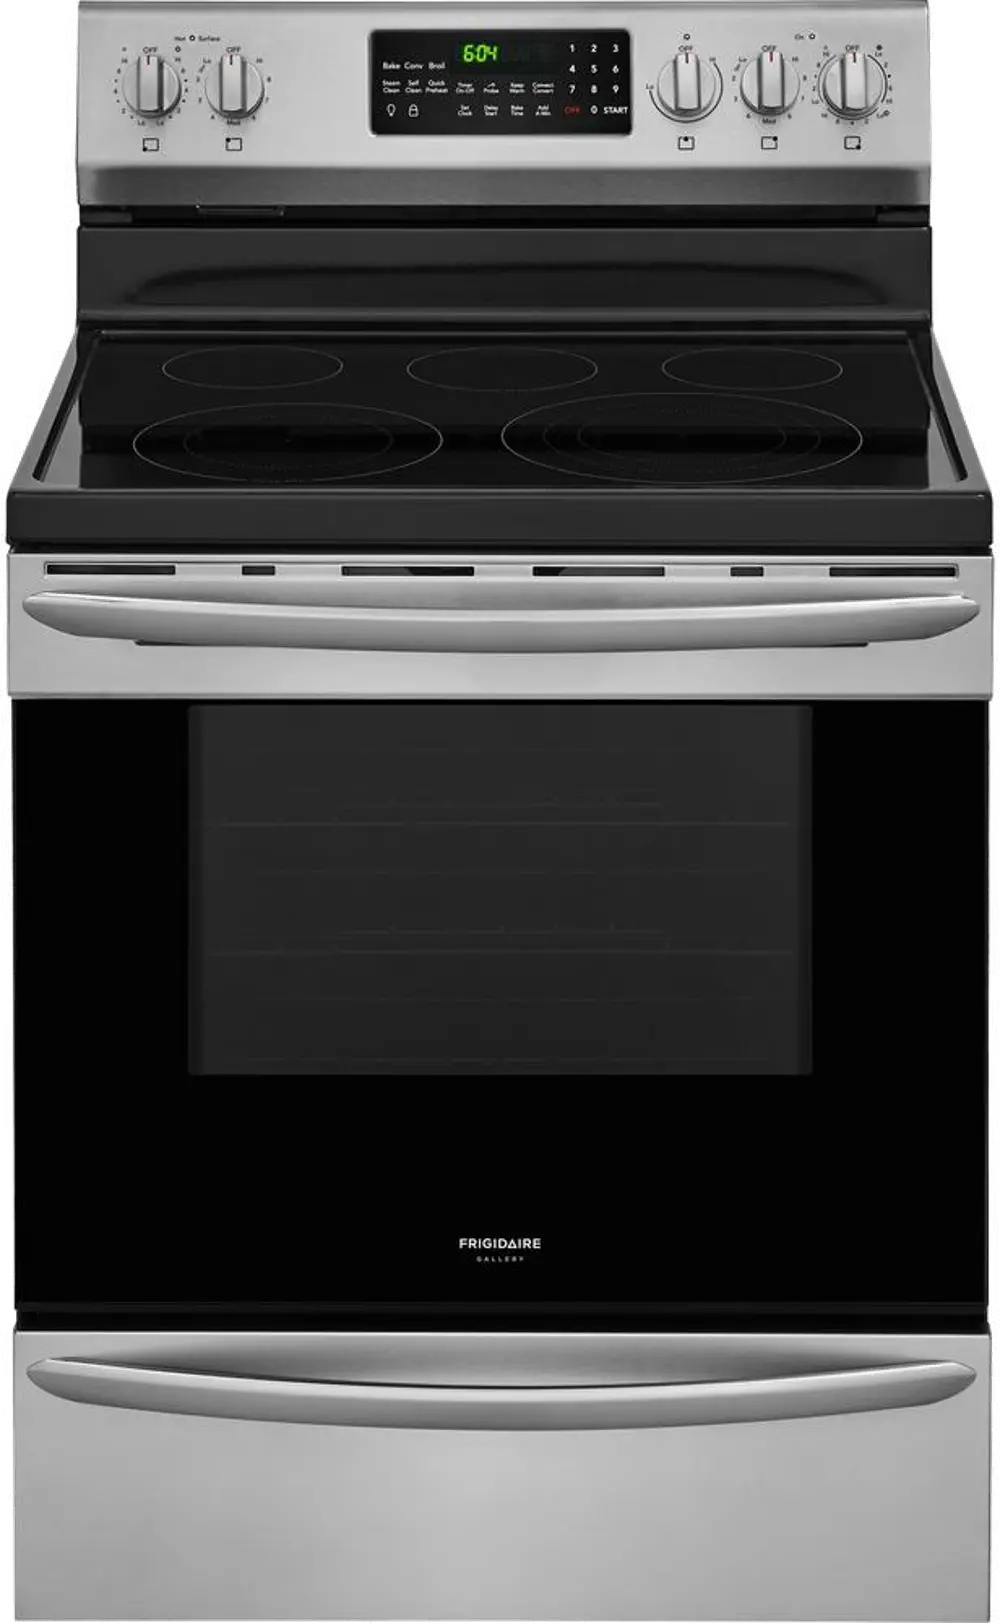 FGEF3059TF Frigidaire Electric Range - 5.7 cu. ft. Stainless Steel-1